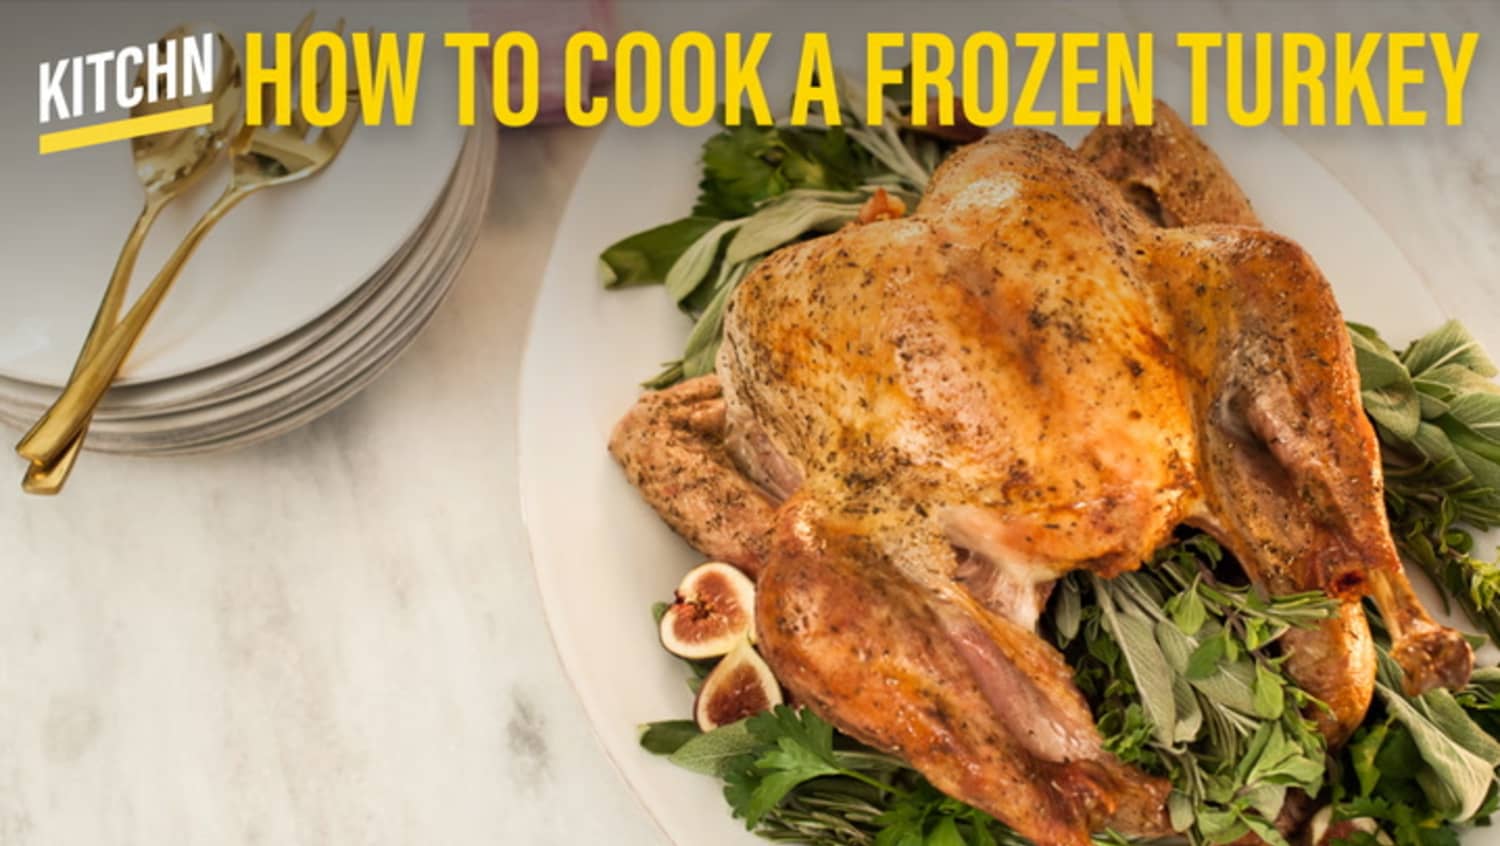 How To Cook A Frozen Turkey Kitchn